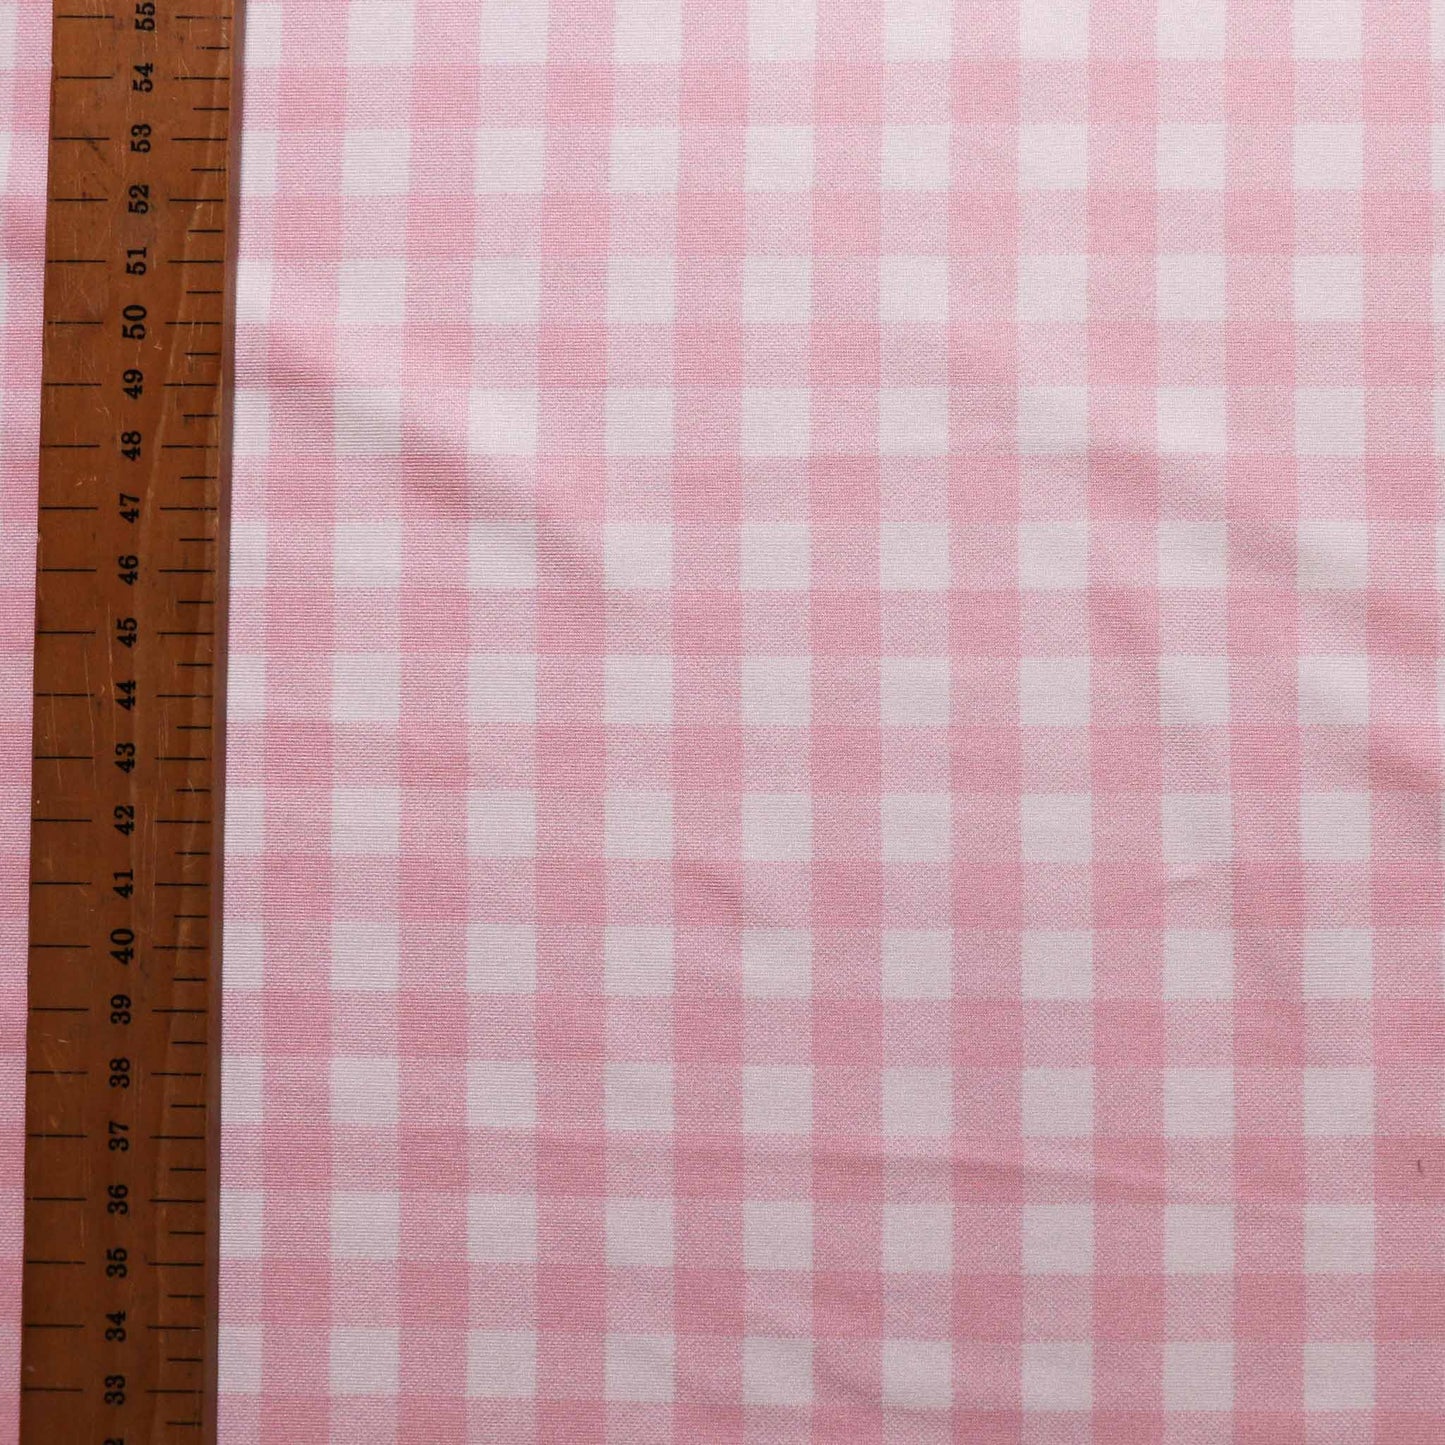 metre lycra jersey stretchy dressmaking fabric with gingham design in pink and white